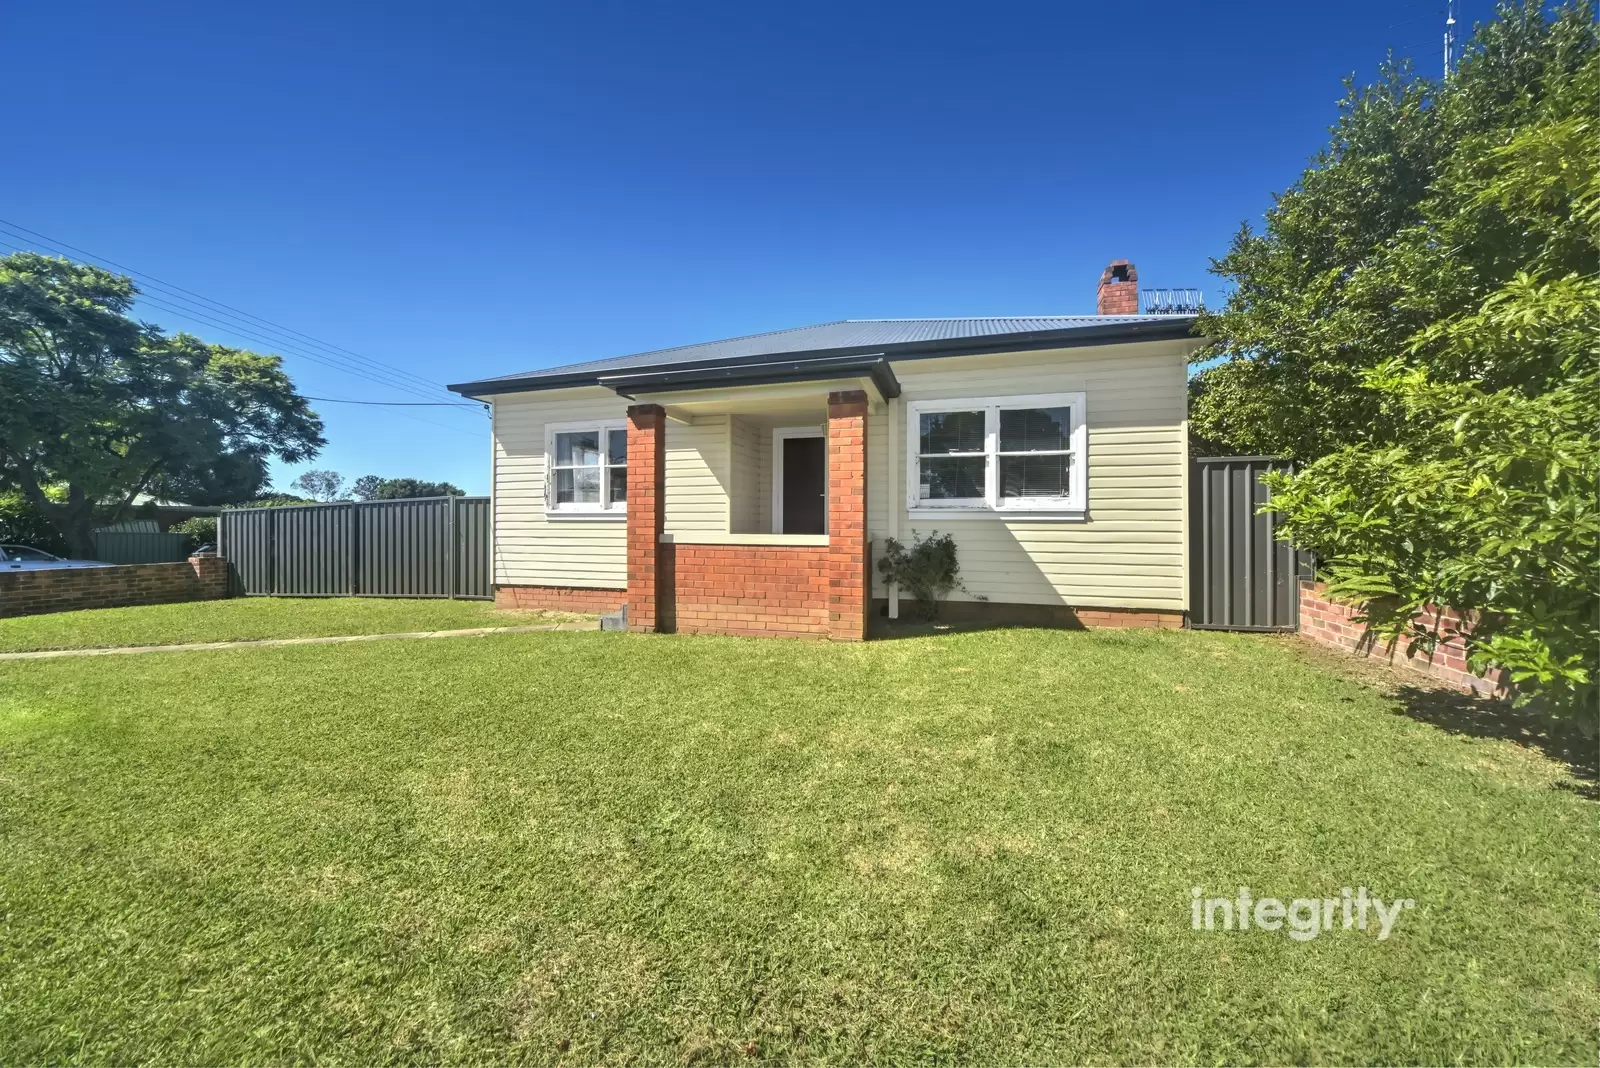 98 Jervis Street, Nowra Sold by Integrity Real Estate